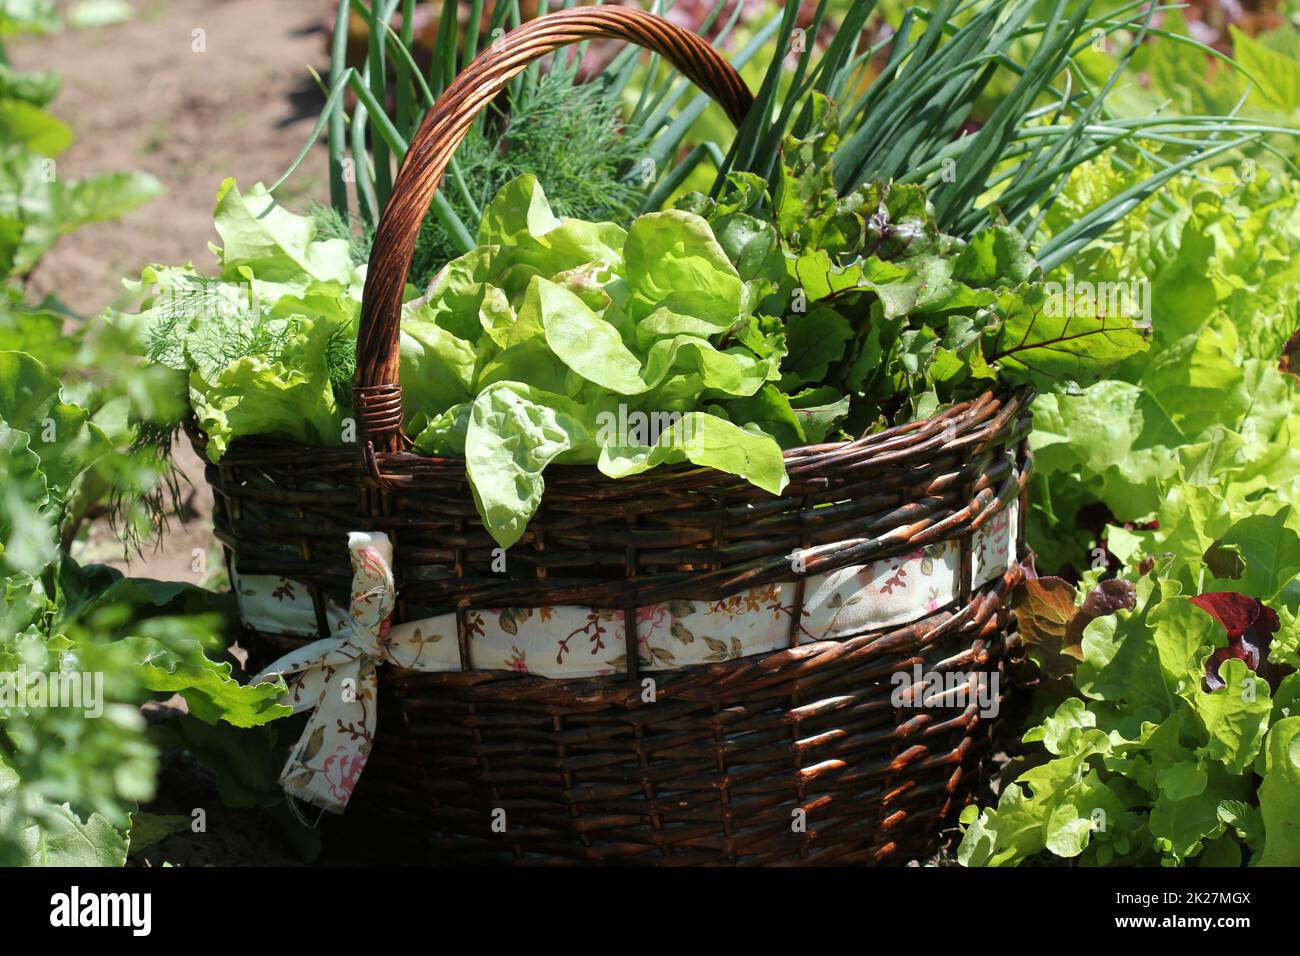 Fresh organic vegetalbles-lettuce,leek, dill,beetroot in a basket placed near a vegetable patch Stock Photo